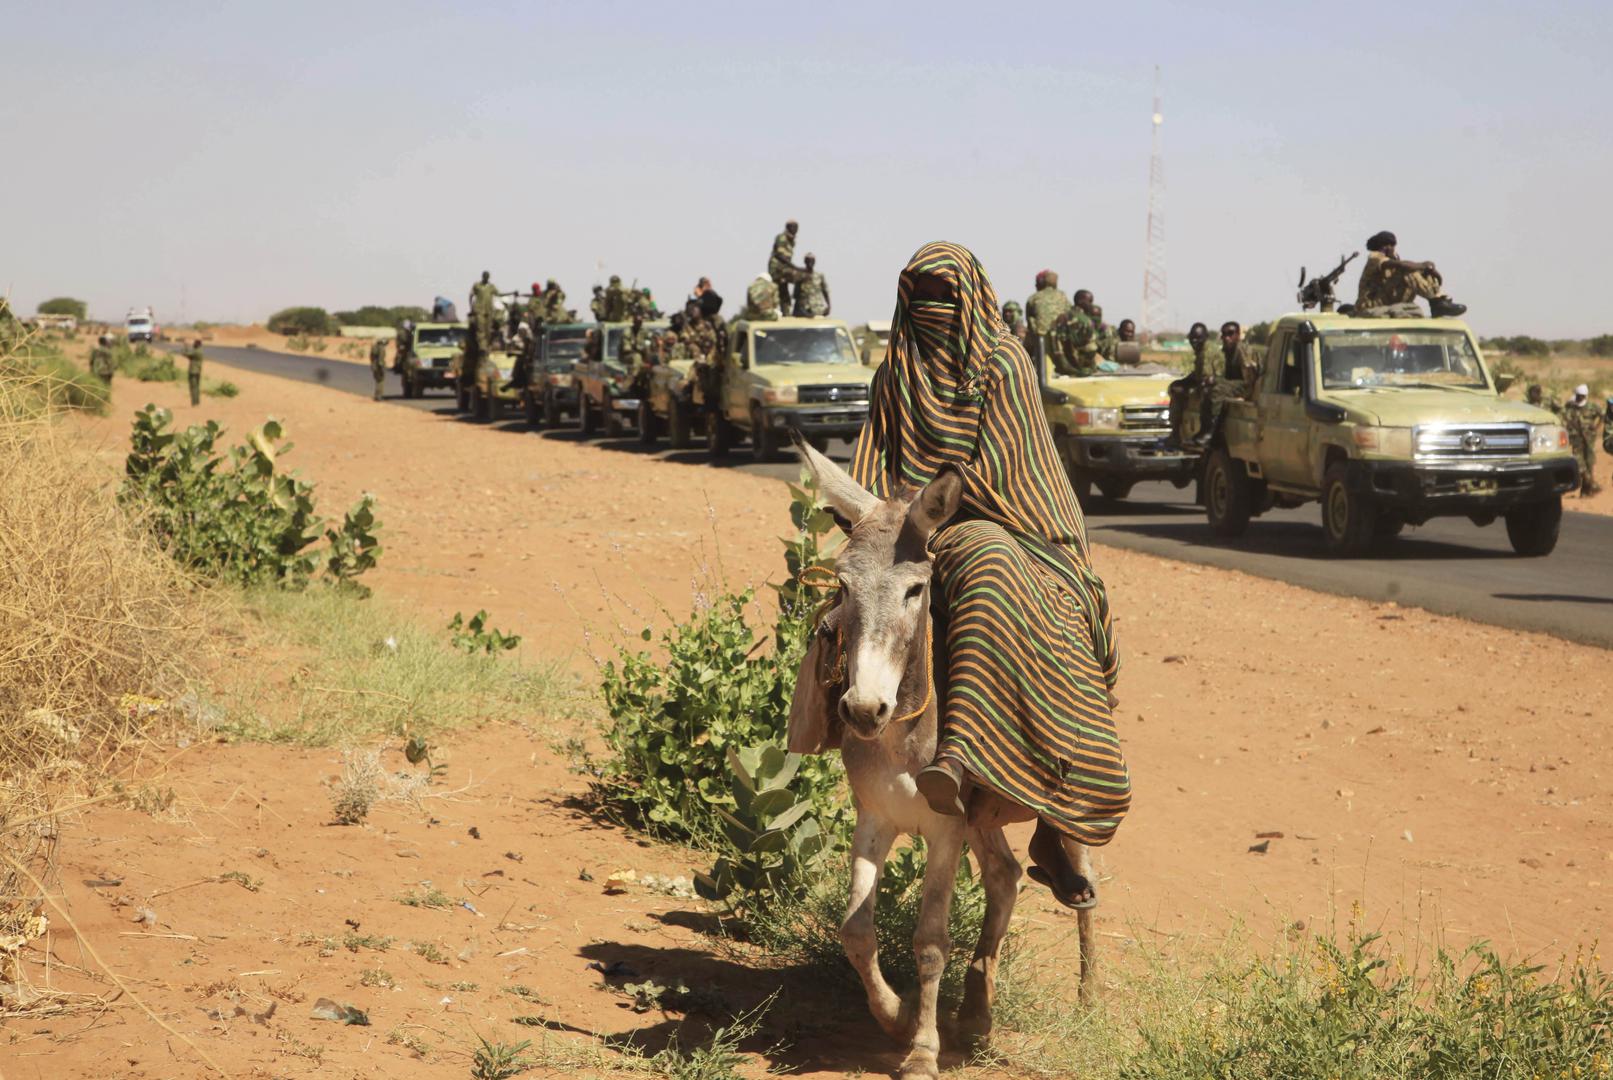 A government military convoy on its way to Tabit town in North Darfur, Sudan, November 20, 2014.